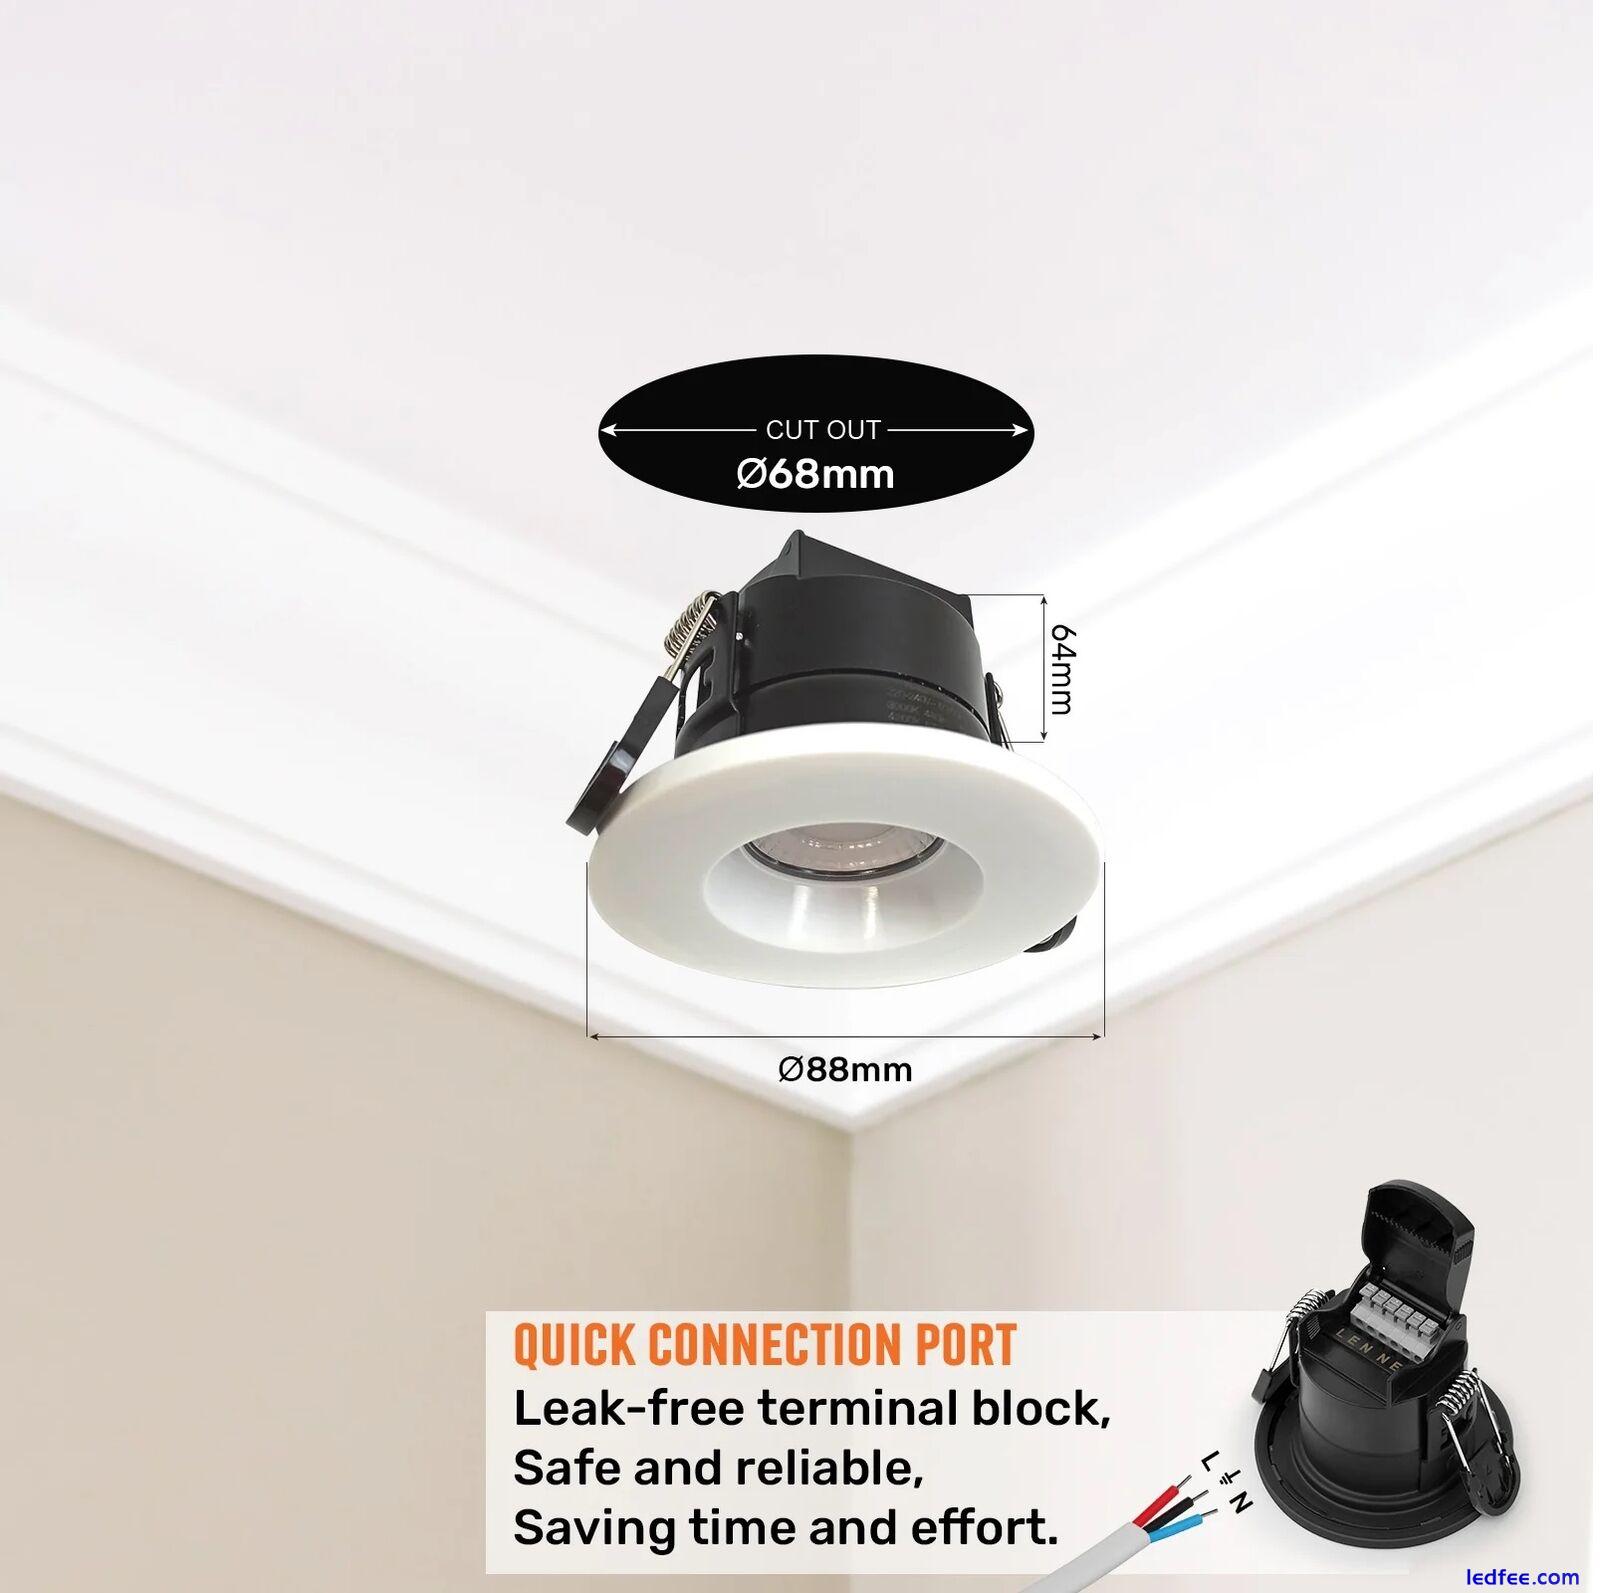 Fire Rated CCT LED Dimmable Downlight Bathroom Spotlights IP65 Black Cool White  4 